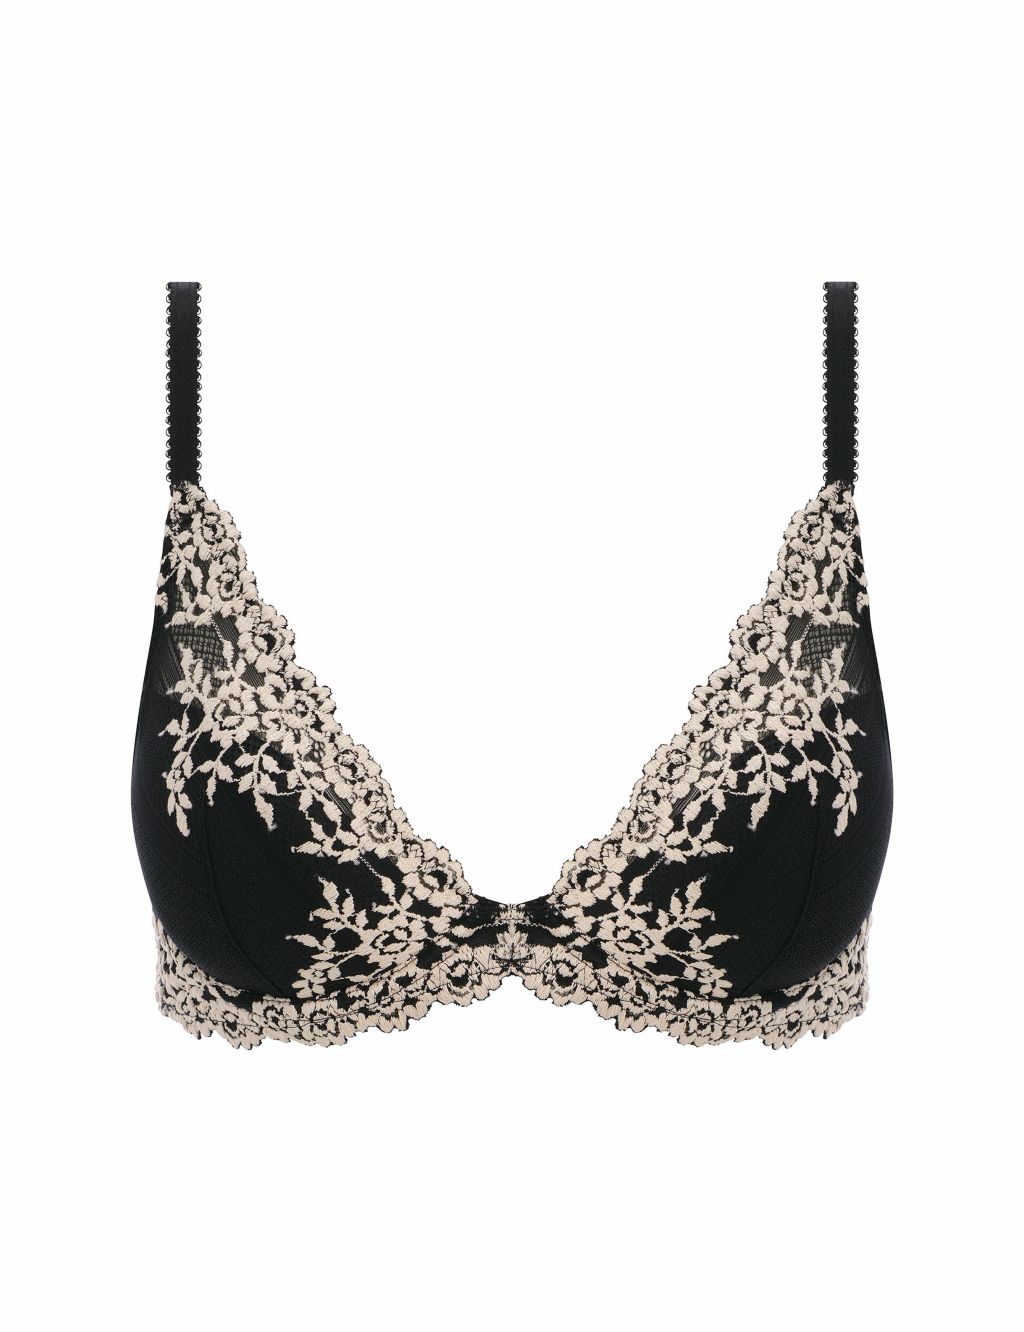 Embrace Floral Lace Wired Plunge Bra image 2